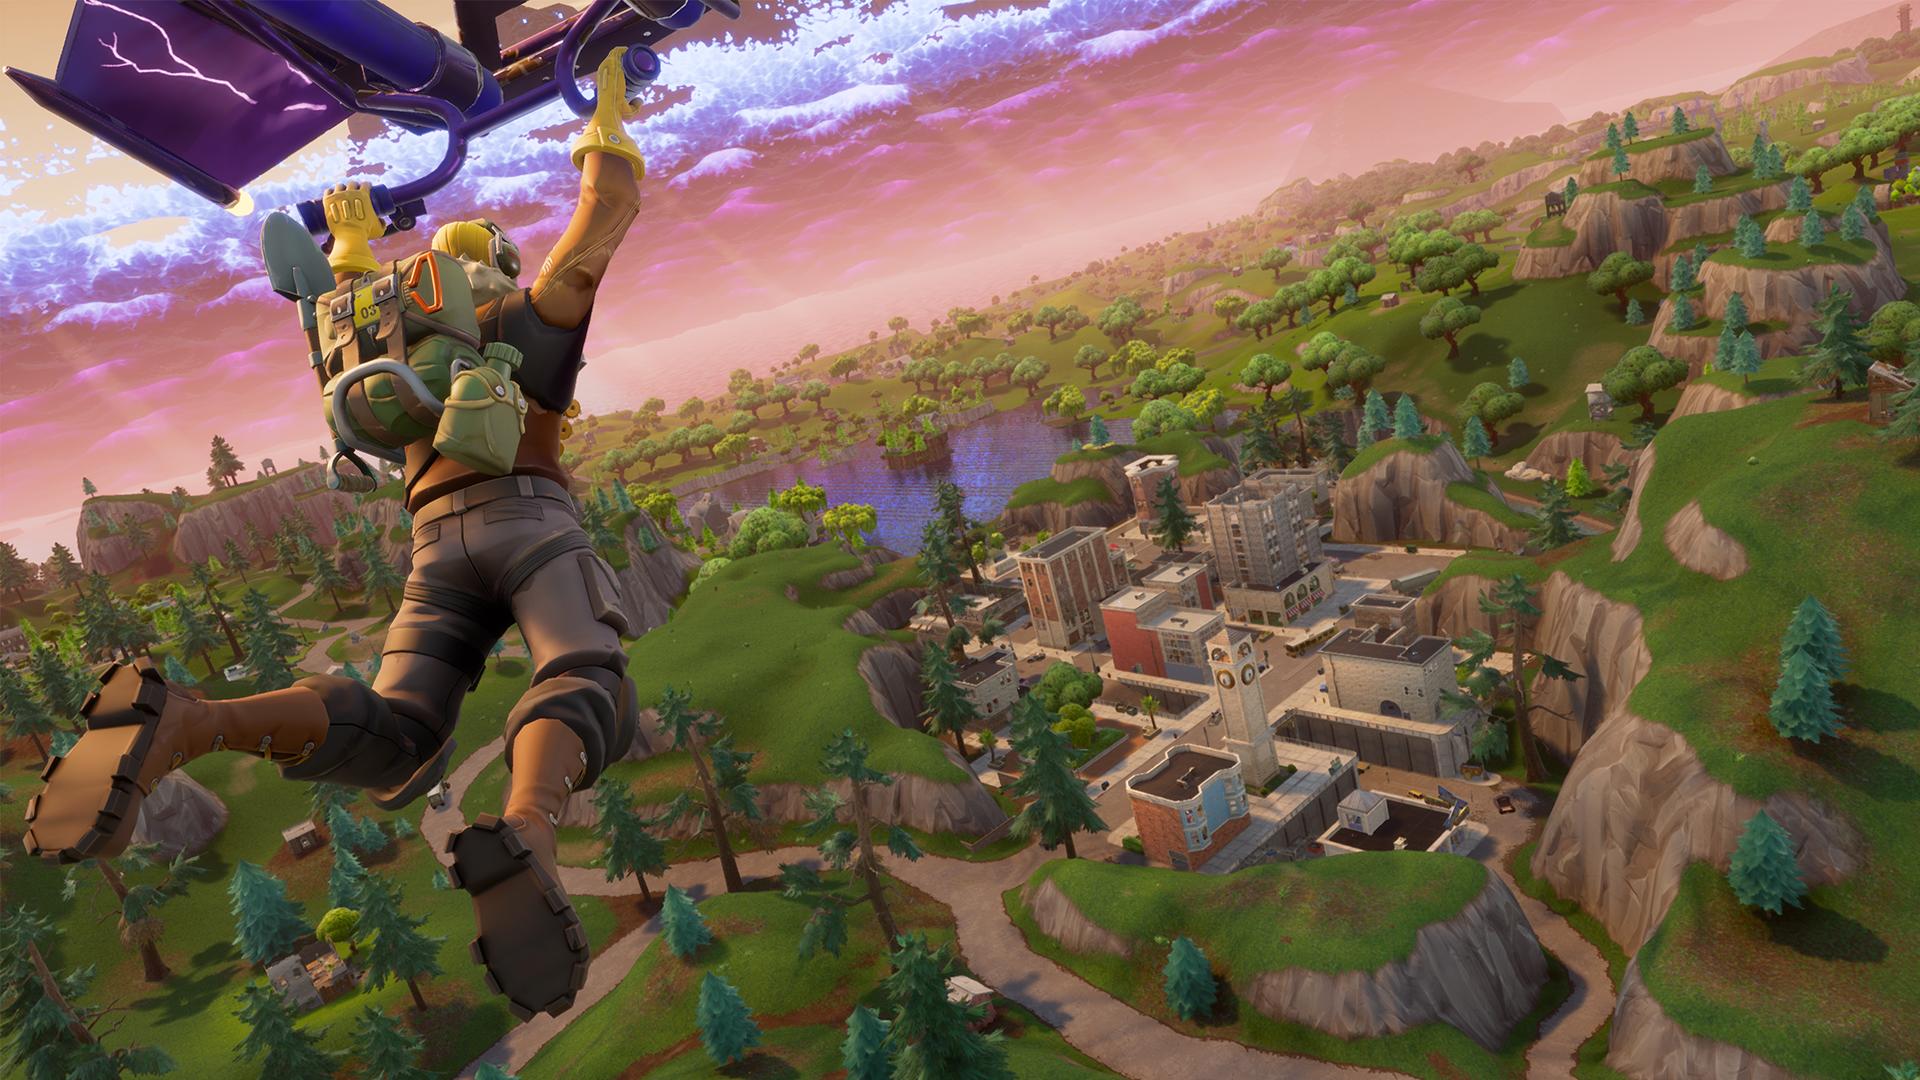 Play Fortnite For Free With Xbox Cloud Gaming - Geek News Central